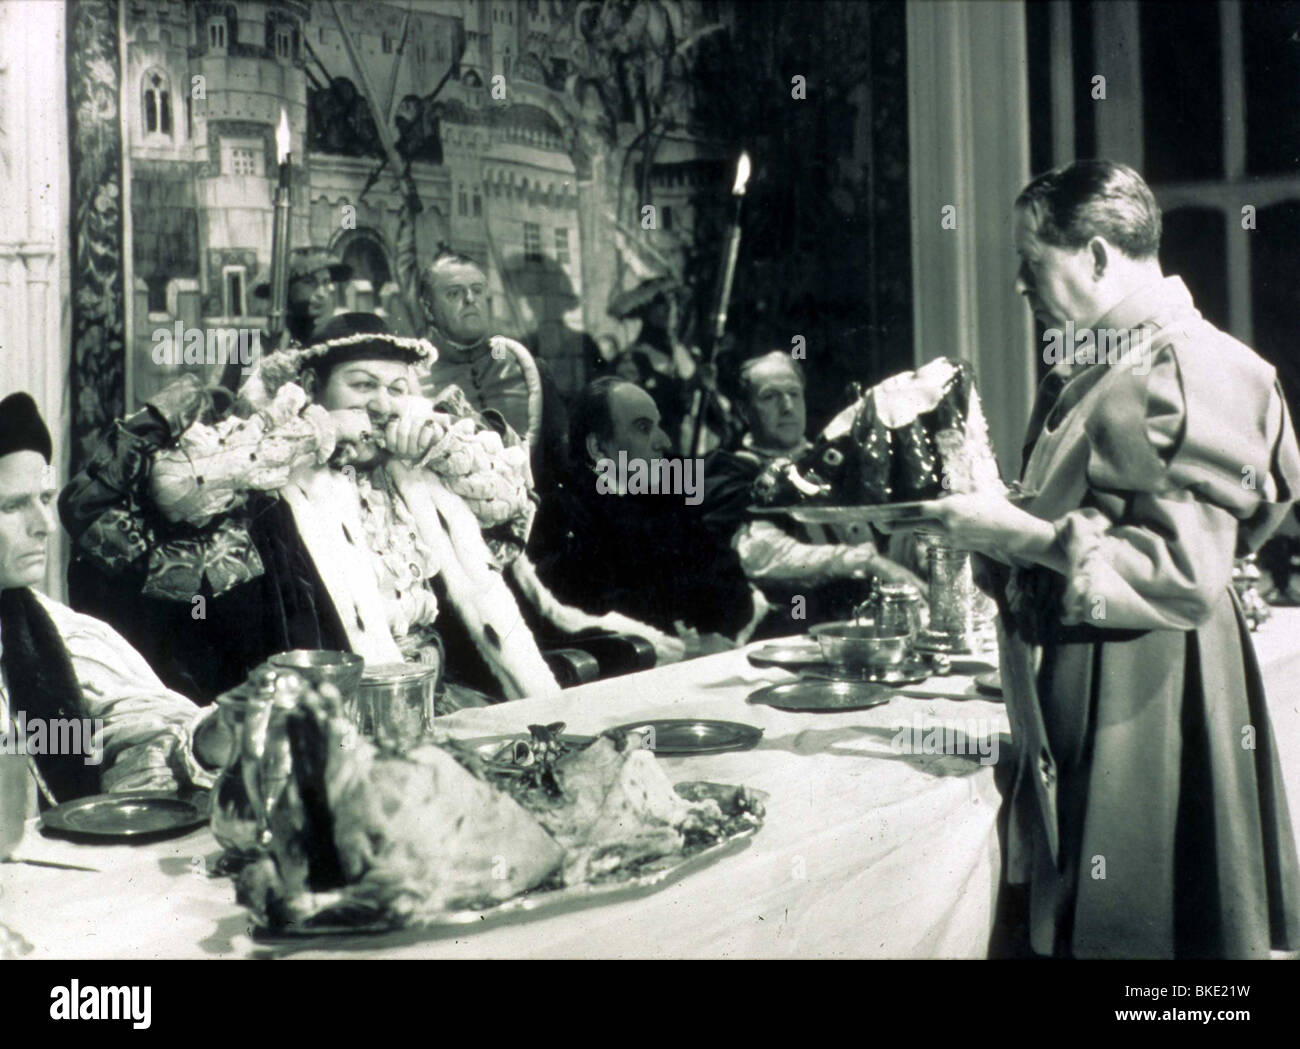 THE PRIVATE LIFE OF HENRY VIII (1933) CHARLES LAUGHTON PLH 013 Stock Photo